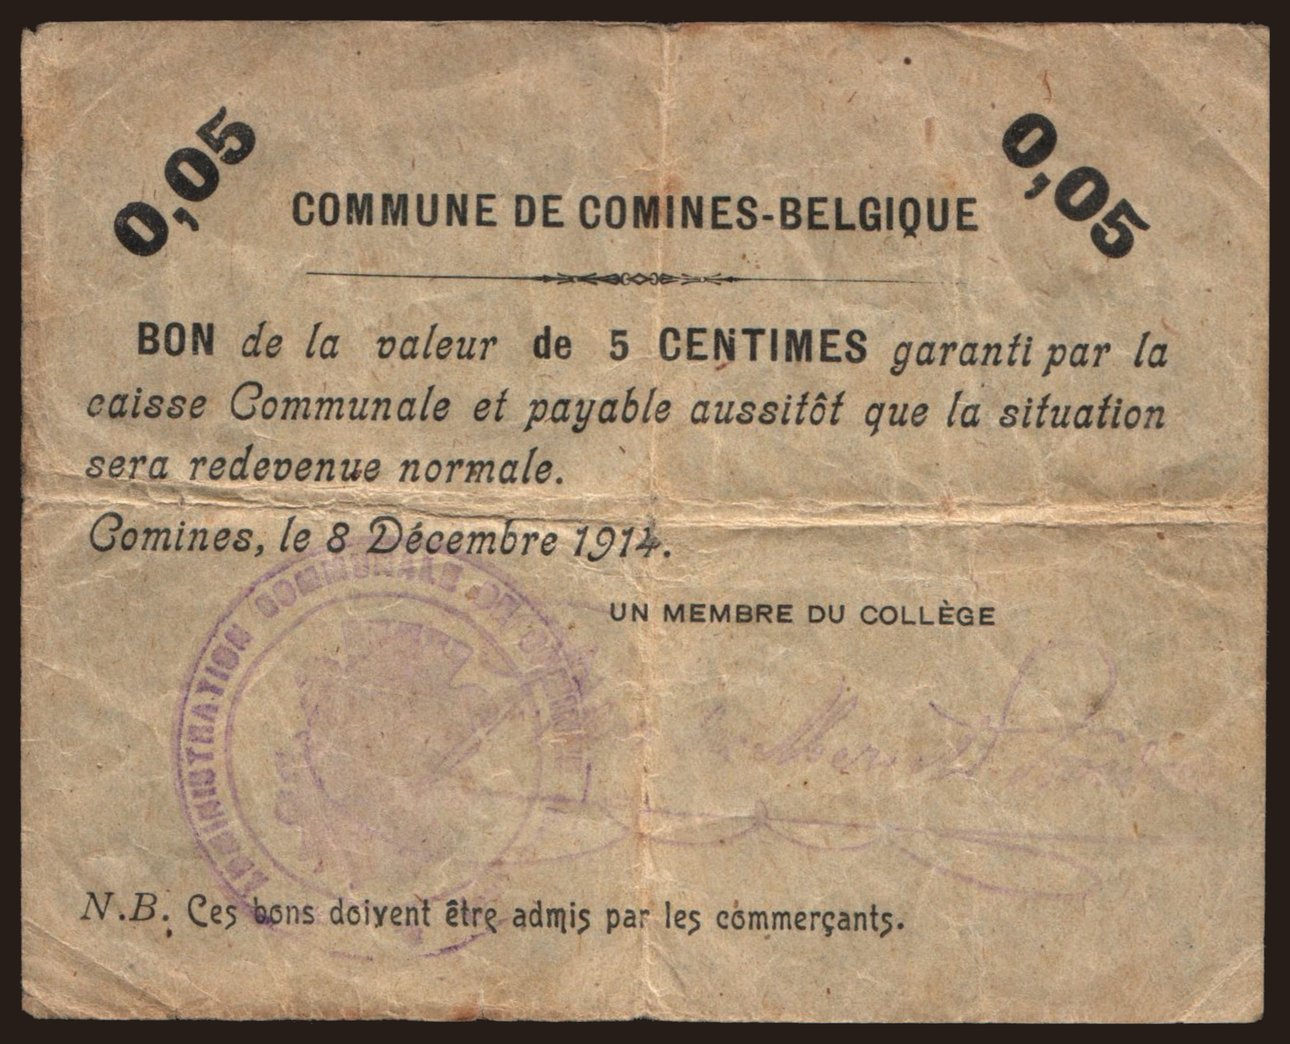 Comines, 5 centimes, 1914